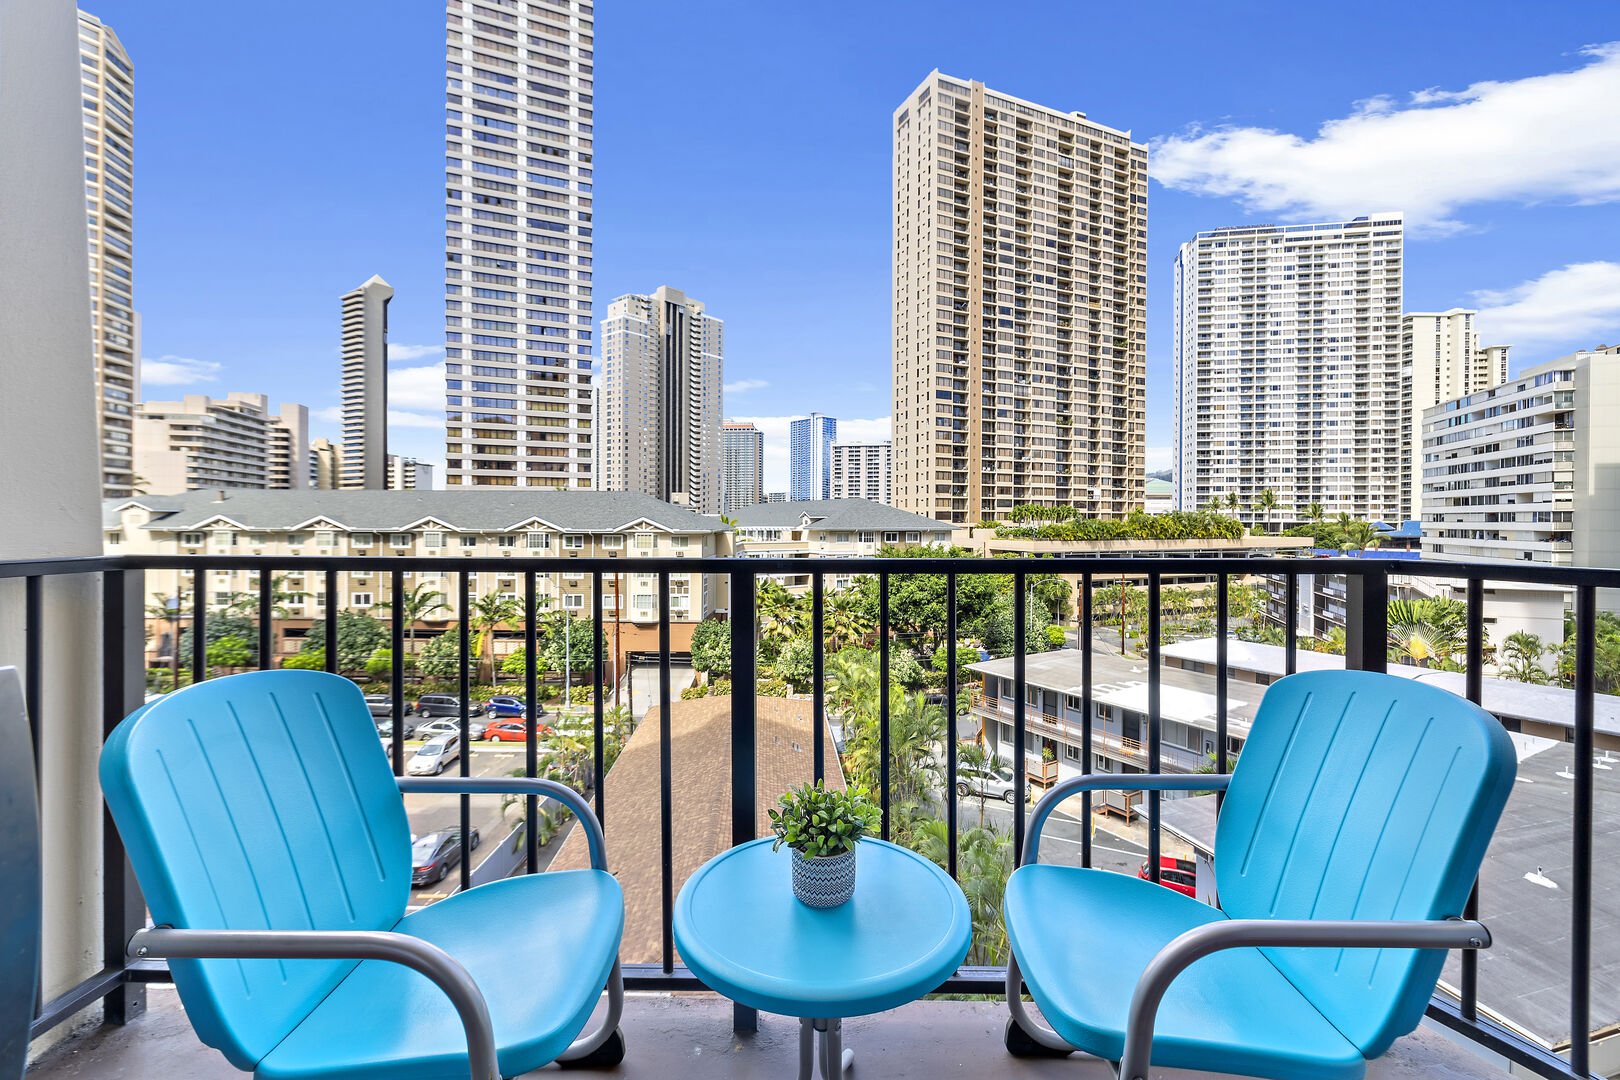 Have your morning coffee on your balcony with city views!